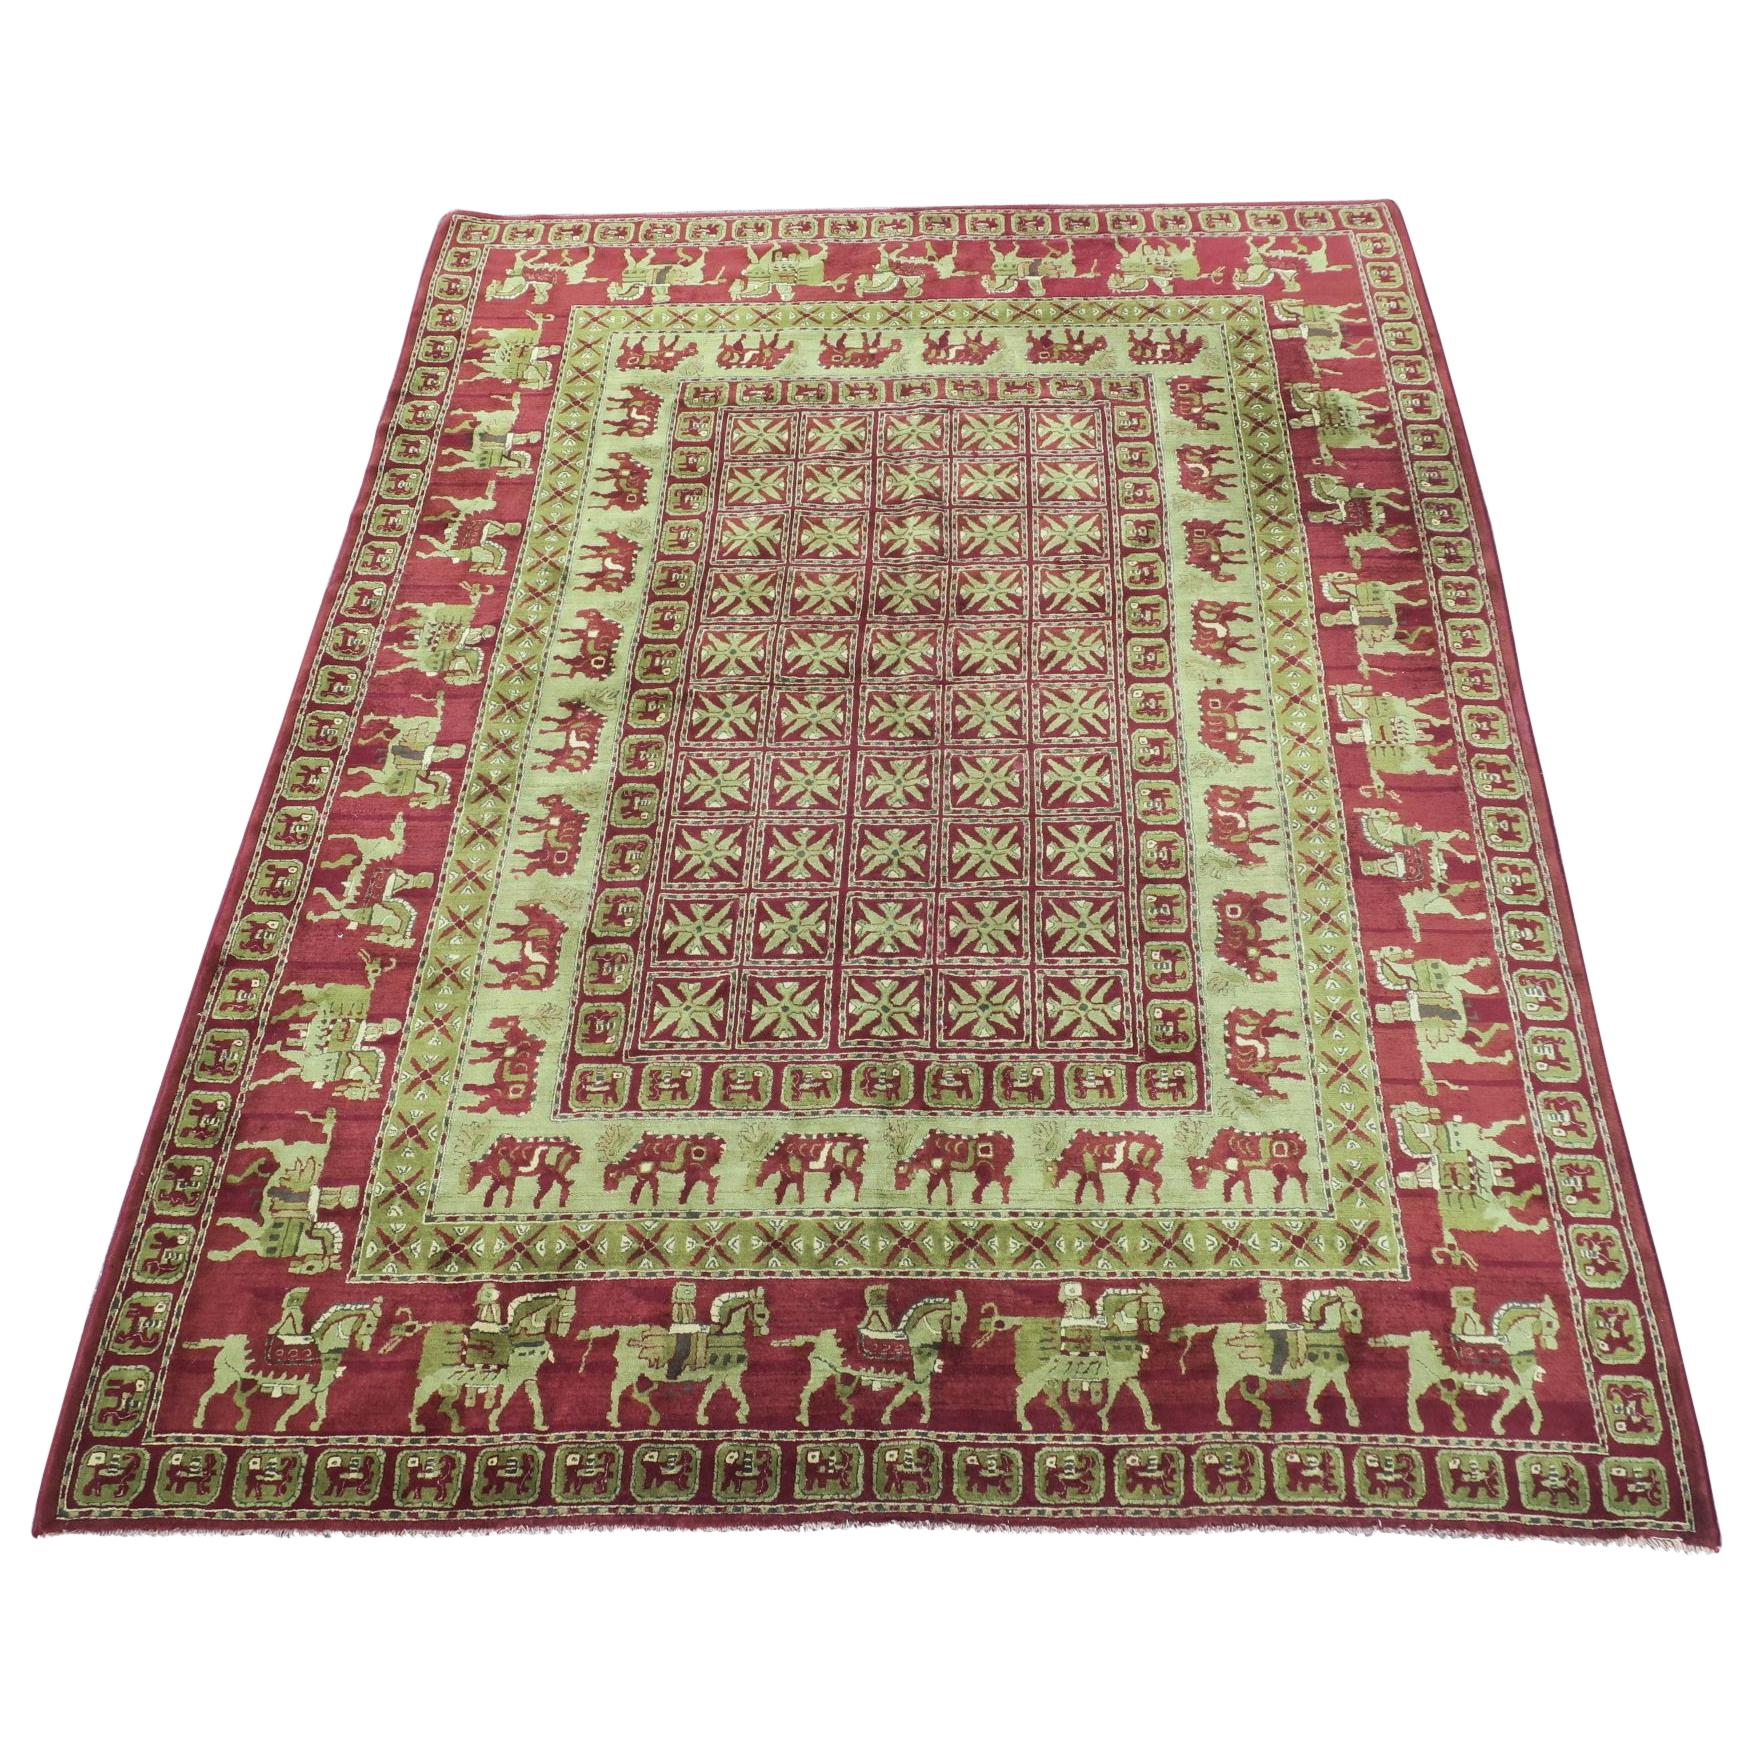 European Hooked Rug, Copy of Pazyryk the Oldest Carpet in the World For Sale